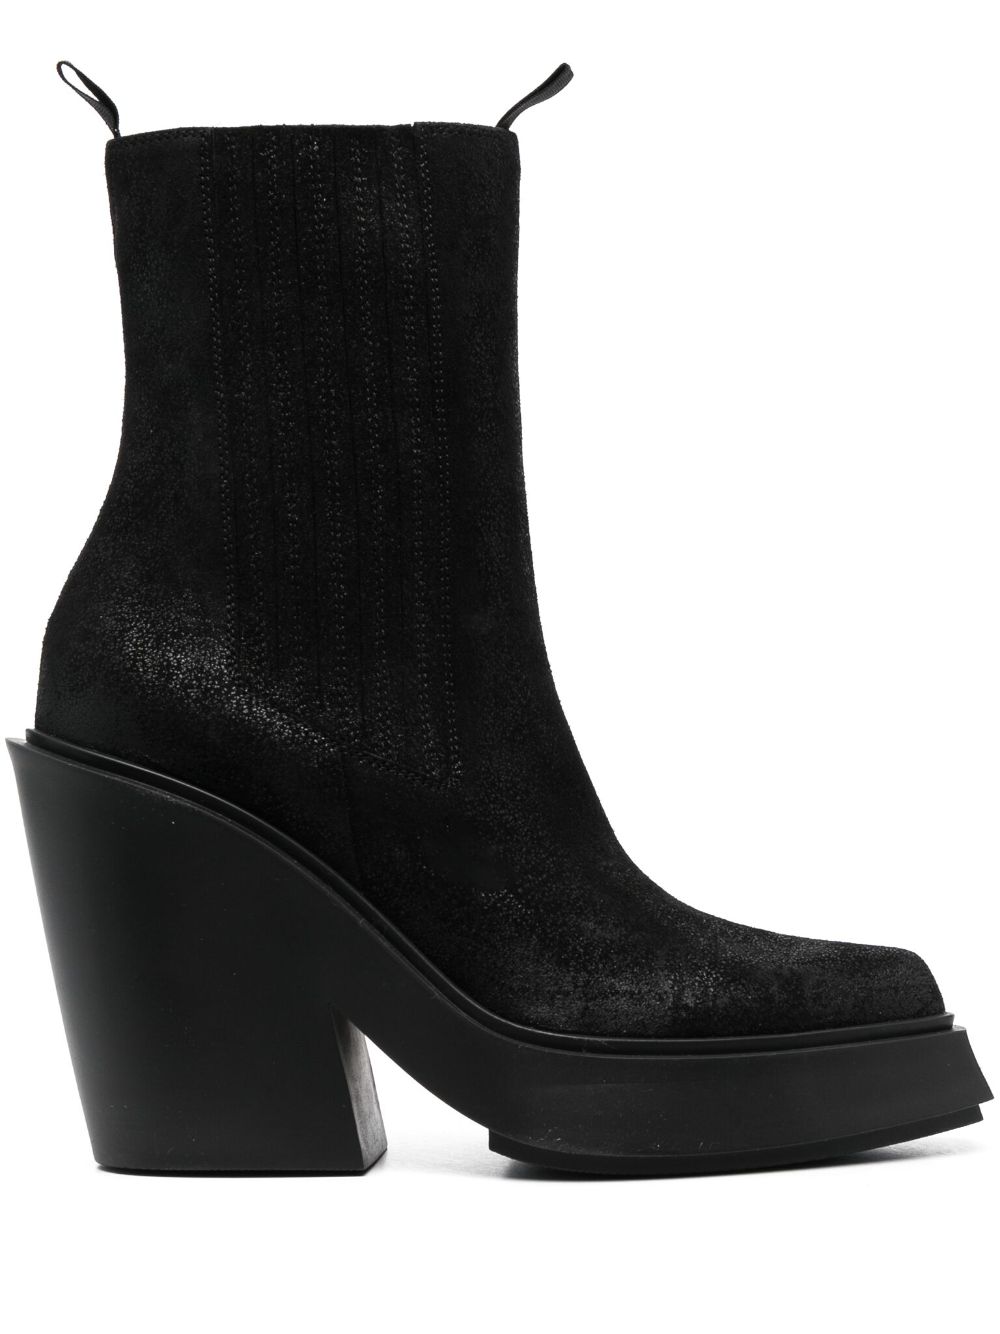 Vic Matie 110mm leather ankle boots - Black